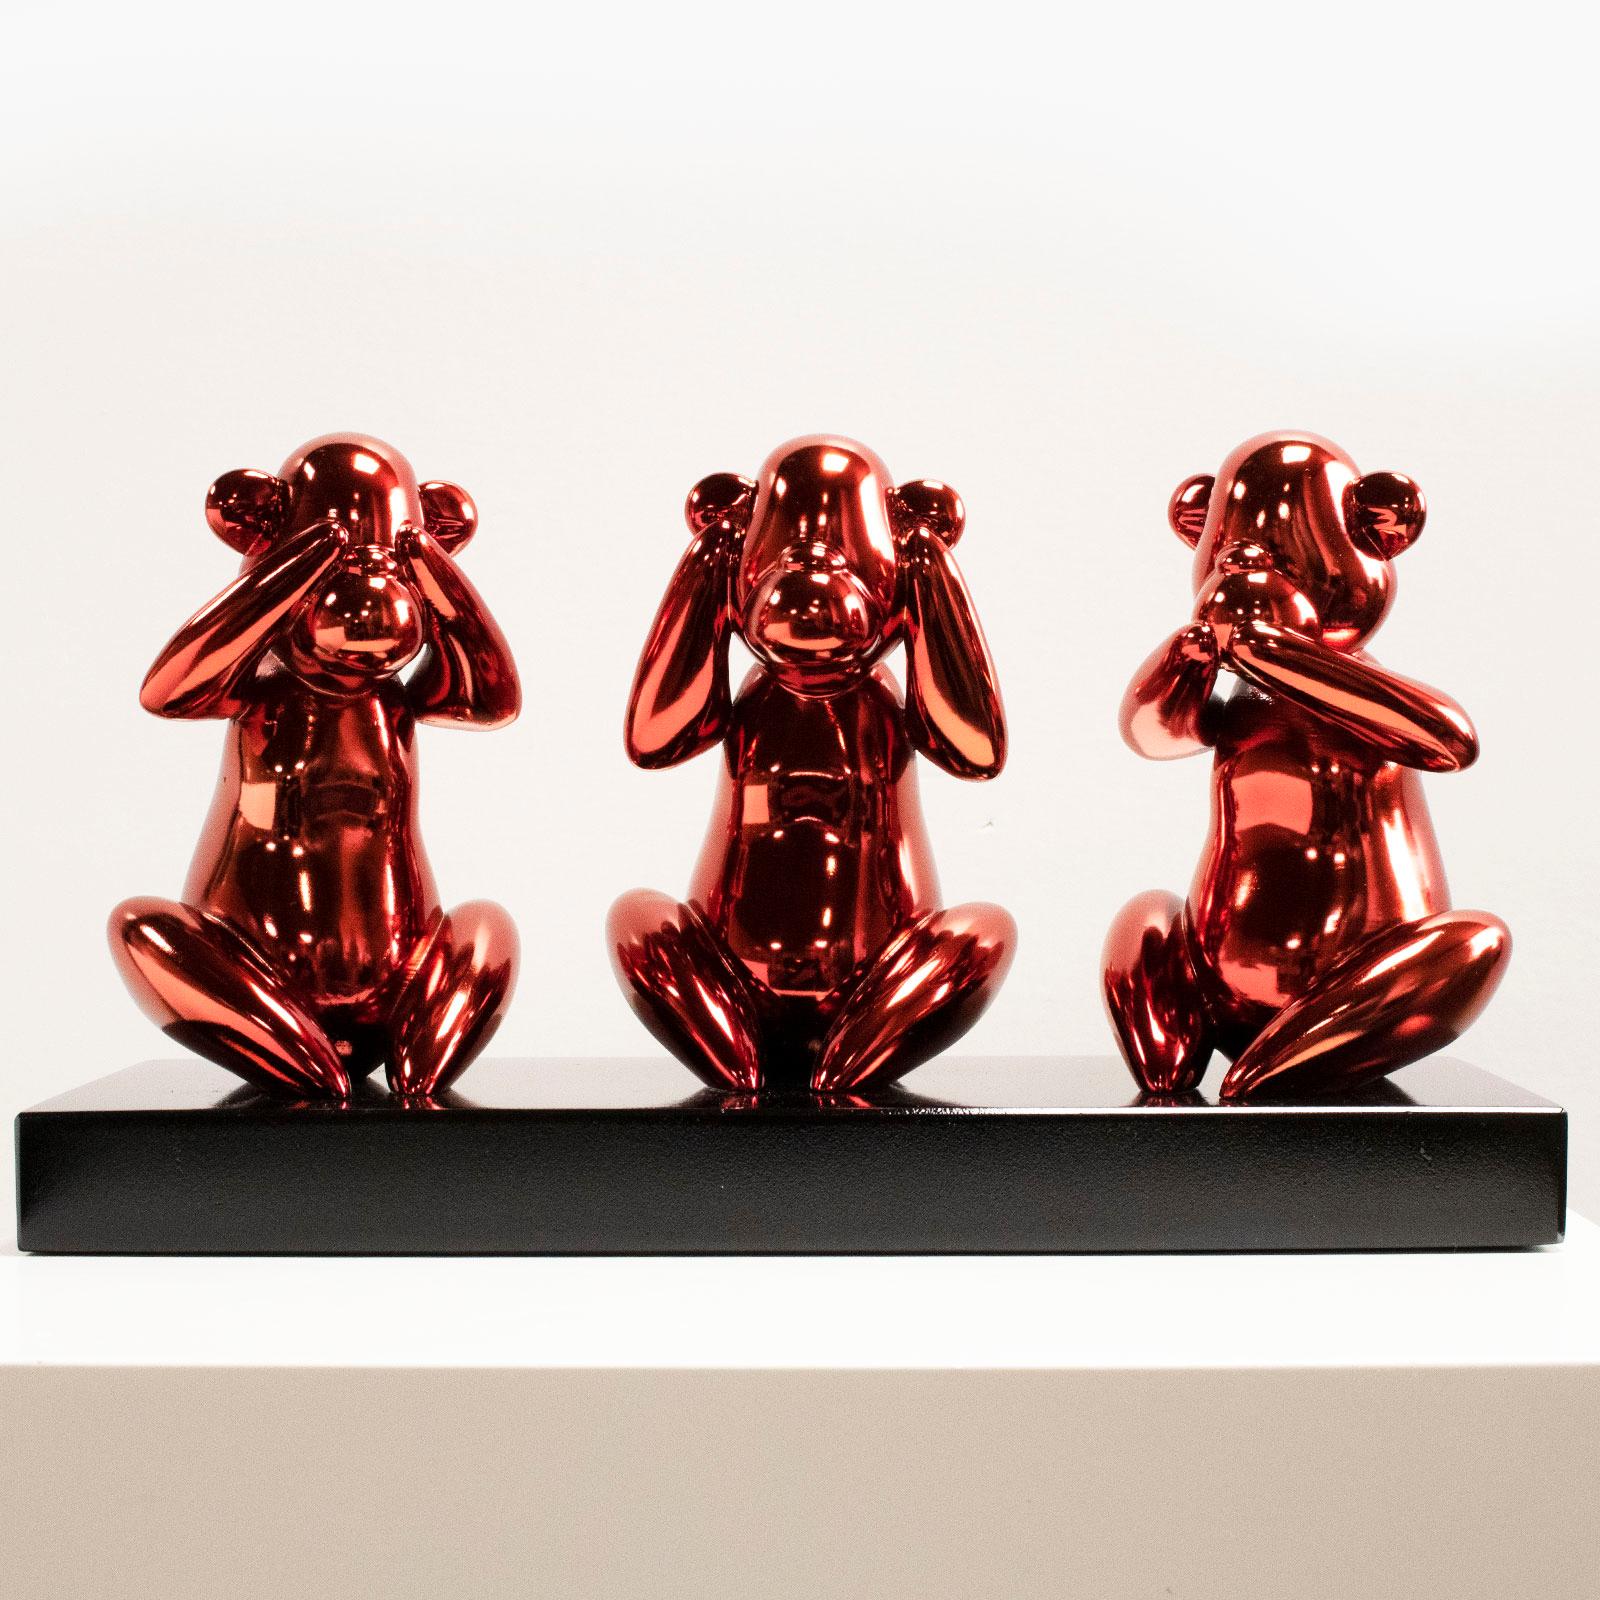 Pop Art Sculpture "Wise monkeys red" by Miguel Guía.
The sculpture is made of a layer of nickel on cold smelting of copper with the base of graphite or marble dust.
Limited edition of 199 works.
Although the required time to deliver a shipment is